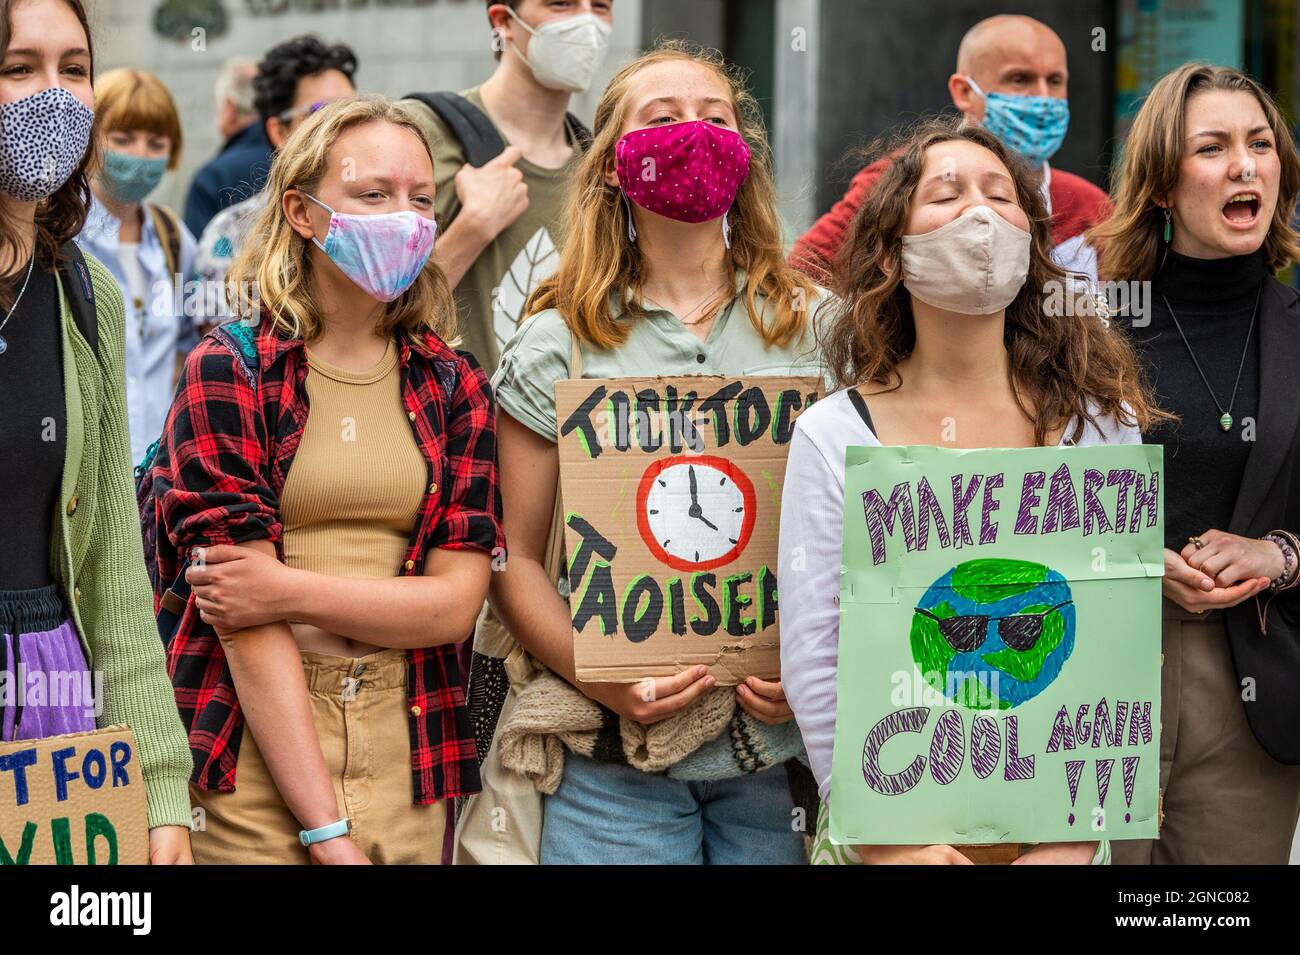 Cork, Ireland. 24th Sep, 2021. Fridays for Future held a global climate strike on Grand Parade in Cork city today, demanding climate justice within Ireland and around the world. Most protestors held signs and placards. Credit: AG News/Alamy Live News Stock Photo